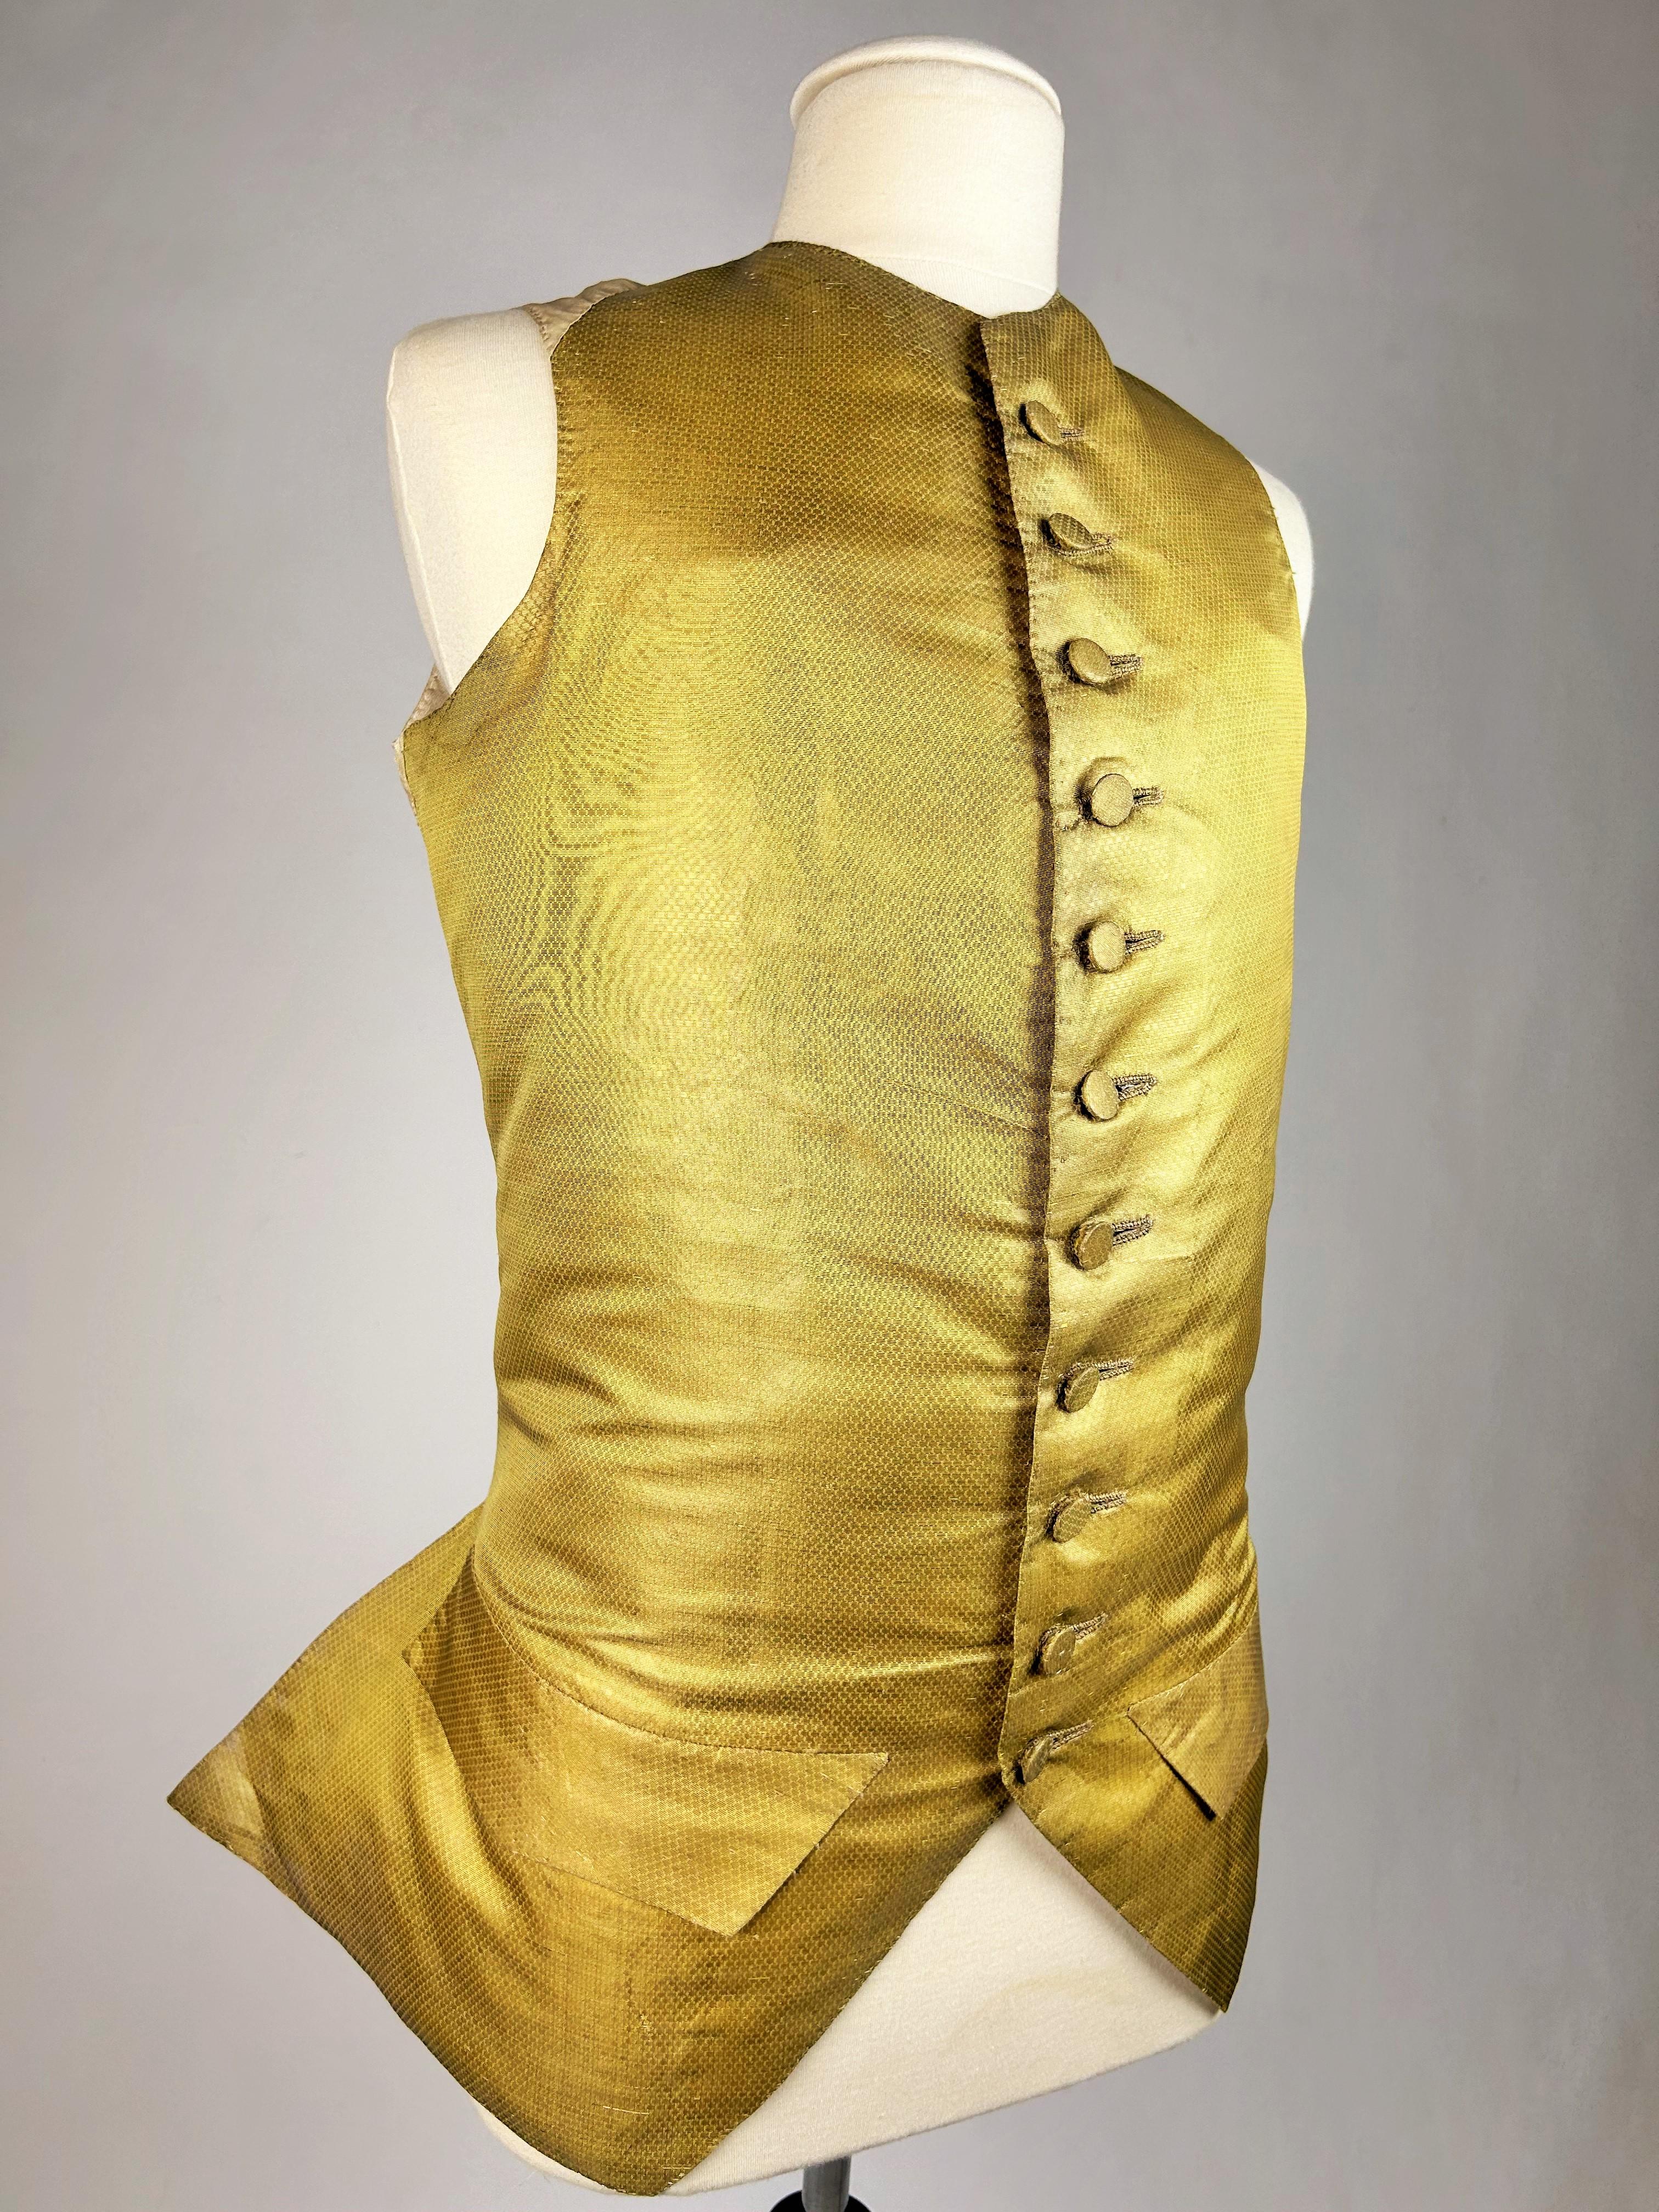 Circa 1770
France

Low-cut waistcoat in gold-spun cloth fashioned with miniature rhombuses dating from the end of the Louis XV period. Fitted cut, crew neck, complete with buttons covered in the same material. Back and lining in unbleached cotton.